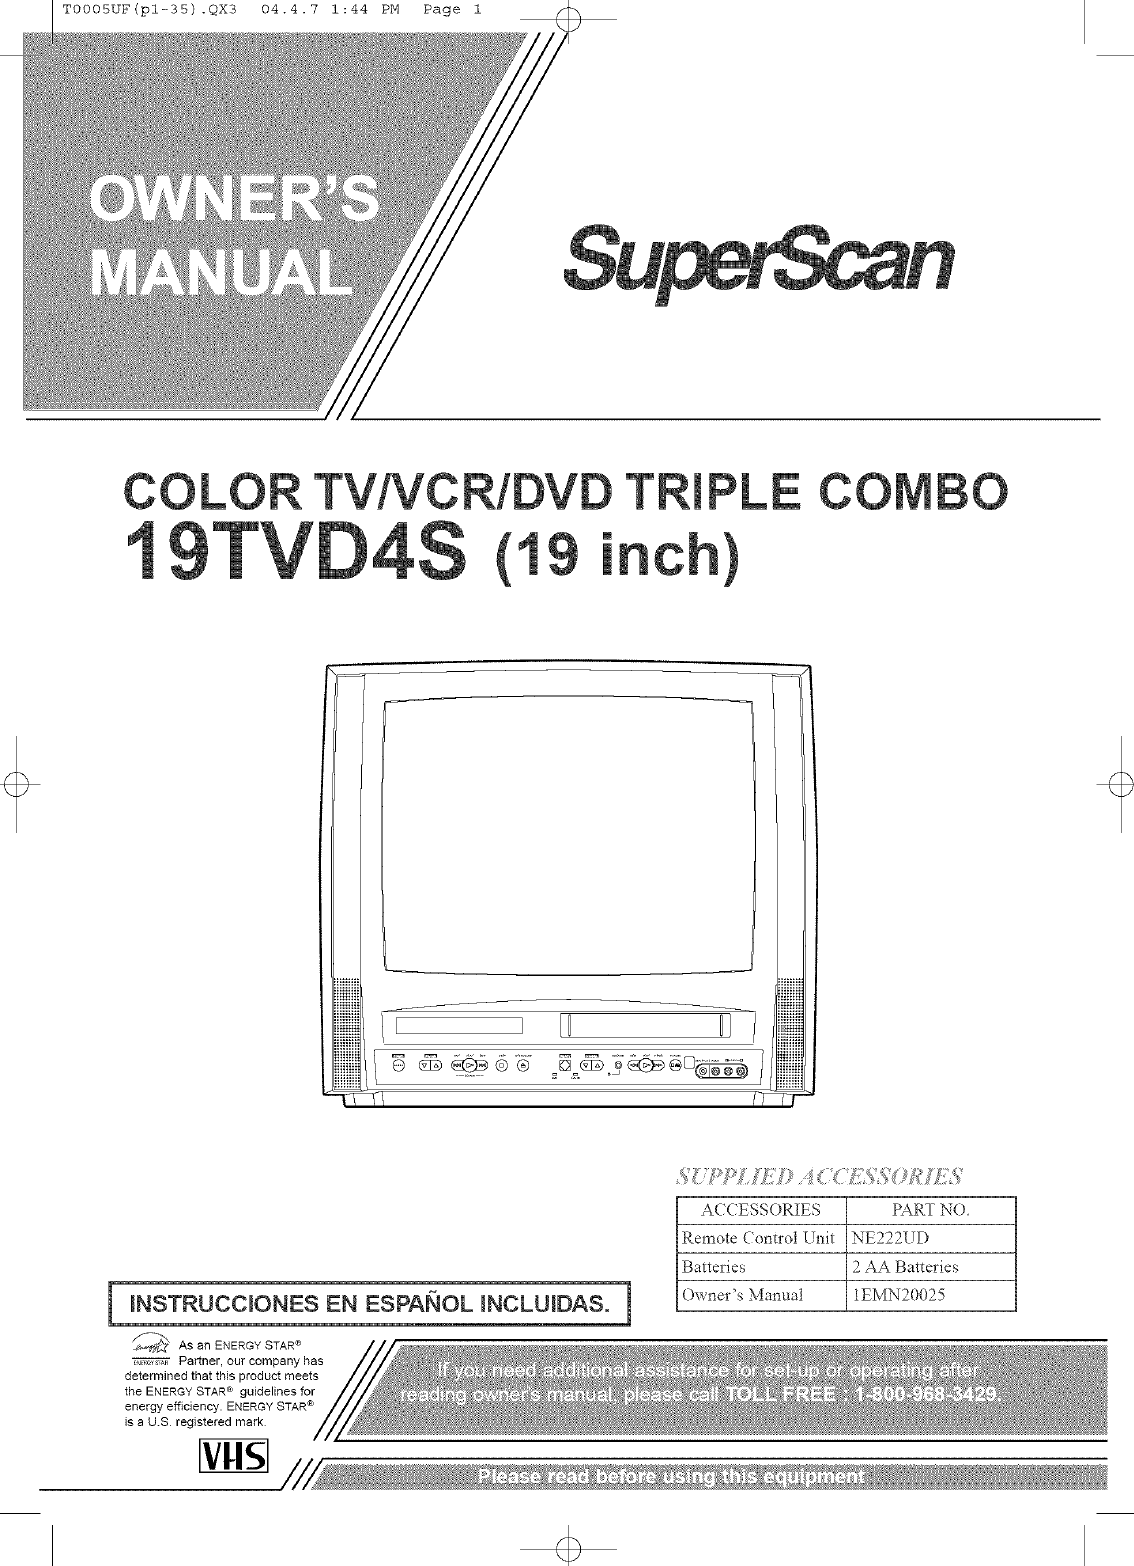 Superscan 19TVD4S User Manual COLOR TV/DVD/VCR Manuals And Guides L0406298